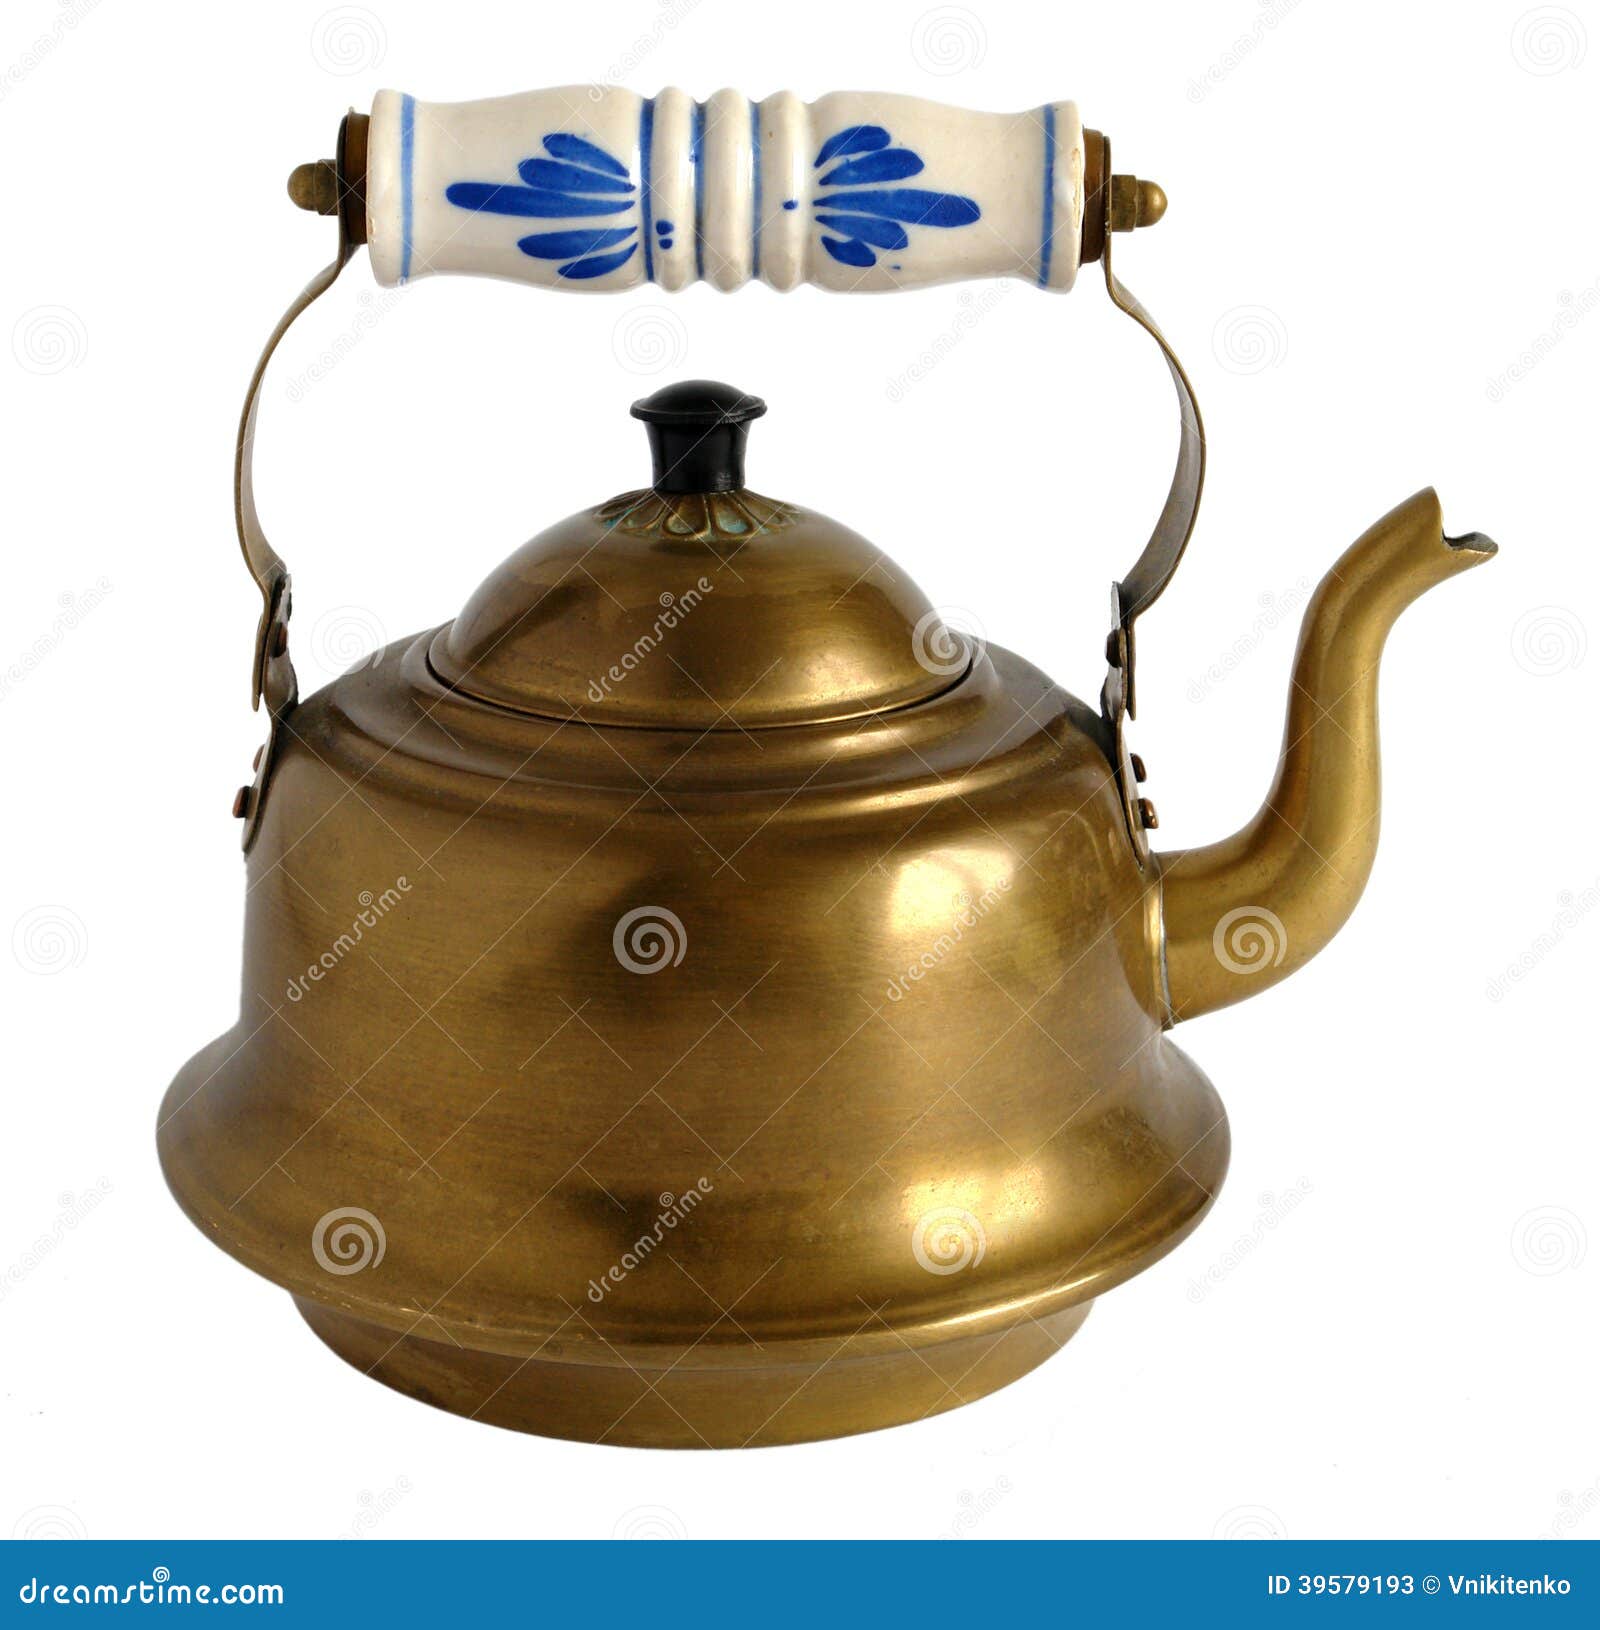 Old Brass Teapot with Porcelain Handle Stock Image - Image of